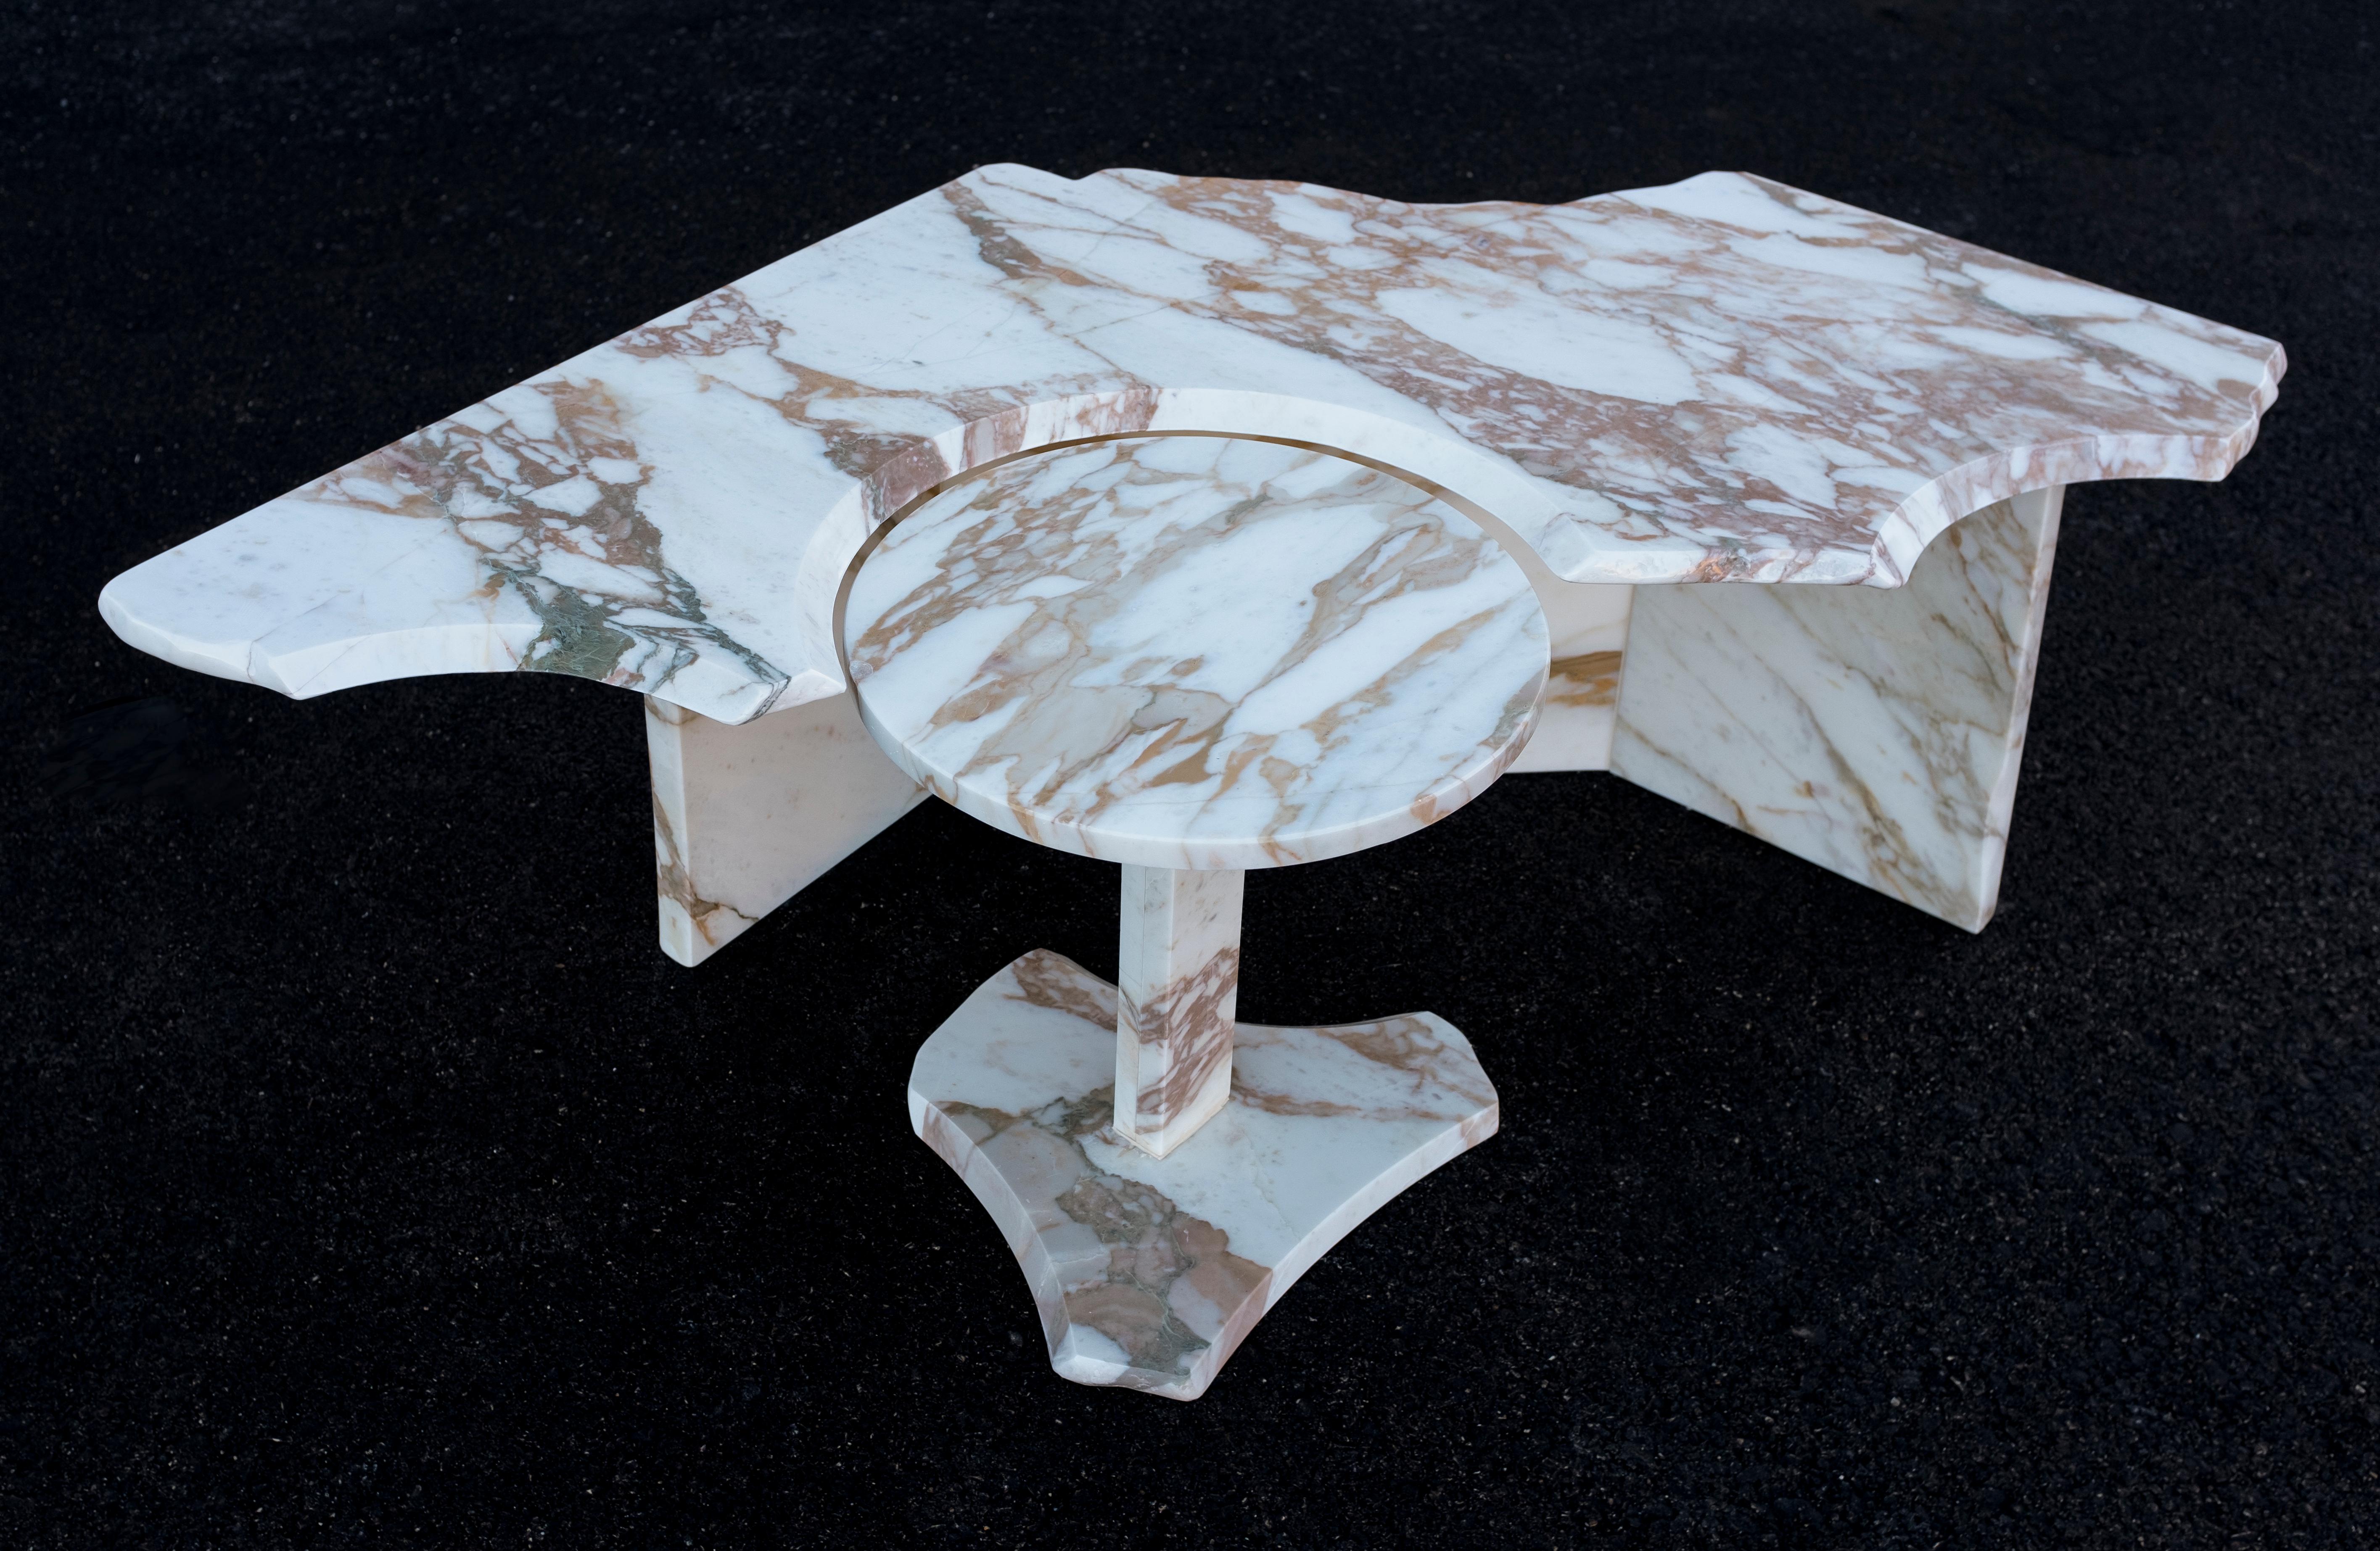 SST015 coffee table by Stone Stackers.
Dimensions: Table 1: W 126 x D 61 x H 39.5 cm.
Table 2: Ø 36 x H 38 cm.
Materials: Calacatta Oro marble.
Weight: 71 kg.

Fashioned by a solid yet intensely sculpted marble top, this table will definitely